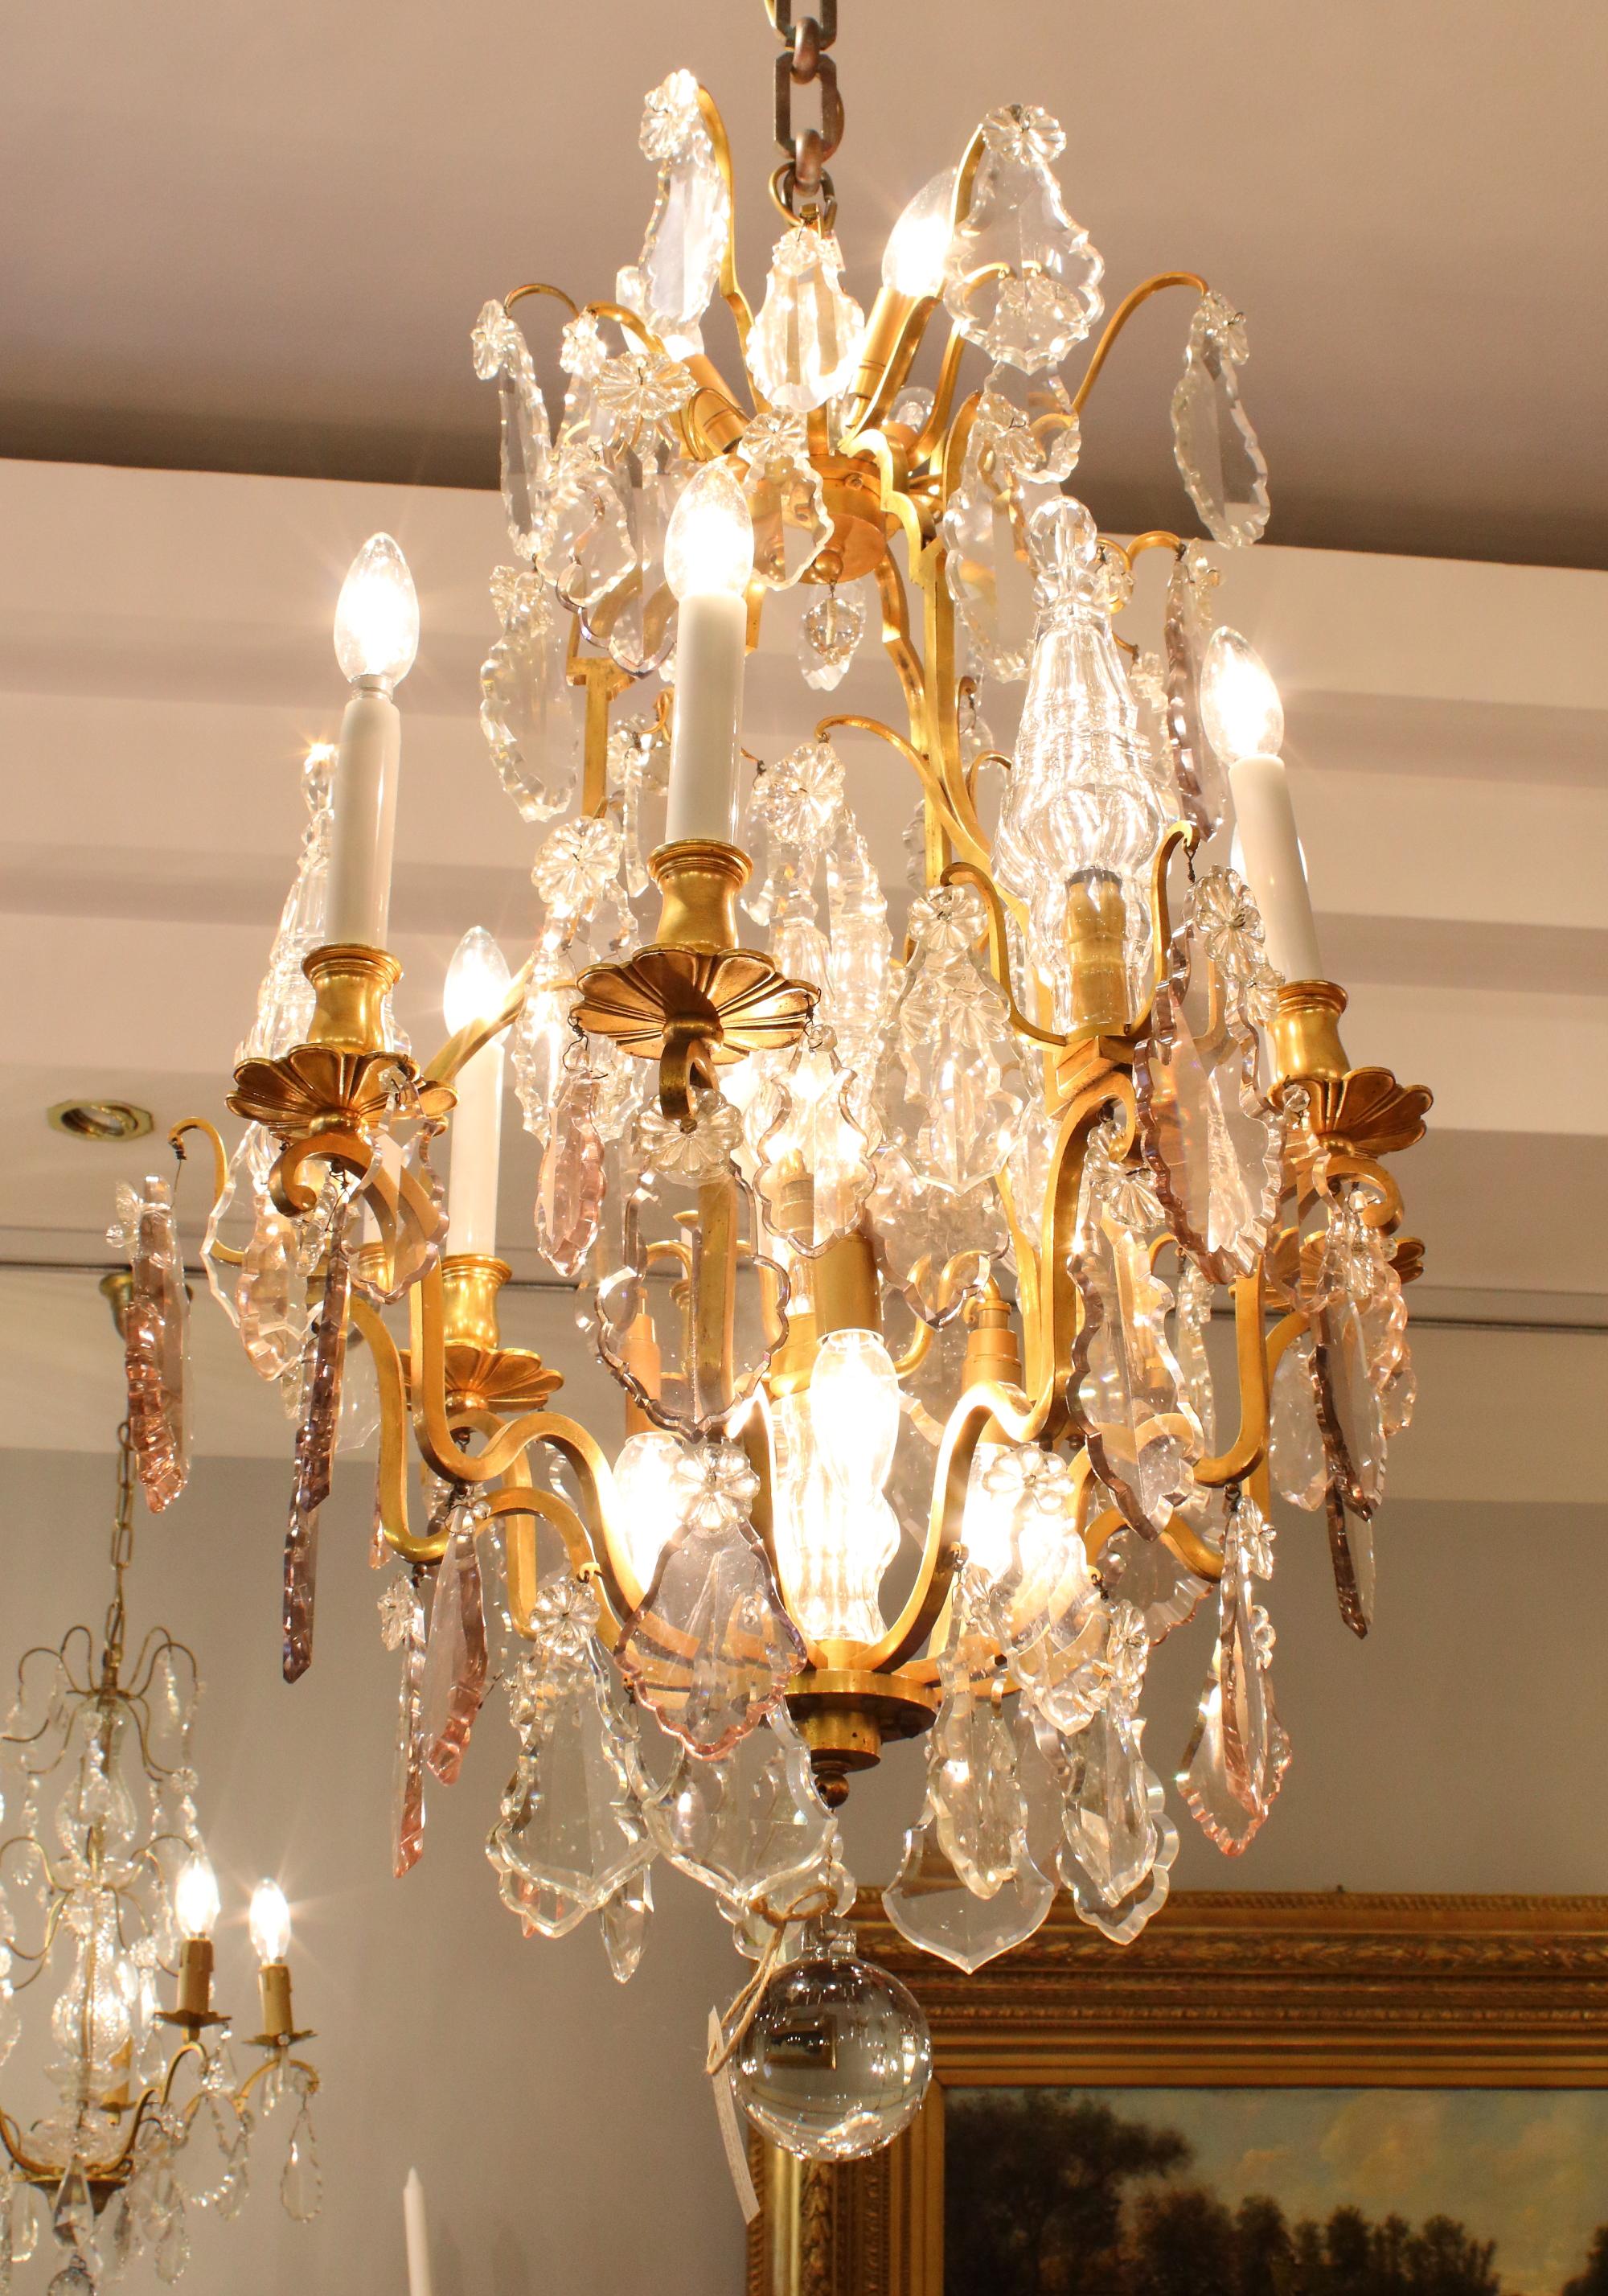 A large Louis XV style 16-light crystal-cut chandelier decorated overall in scalloped crystal glass pendalogues, partially colored, with flower jewels and impressive moulded lit baluster pinnacles. The open pear- or basket shaped frame supports six